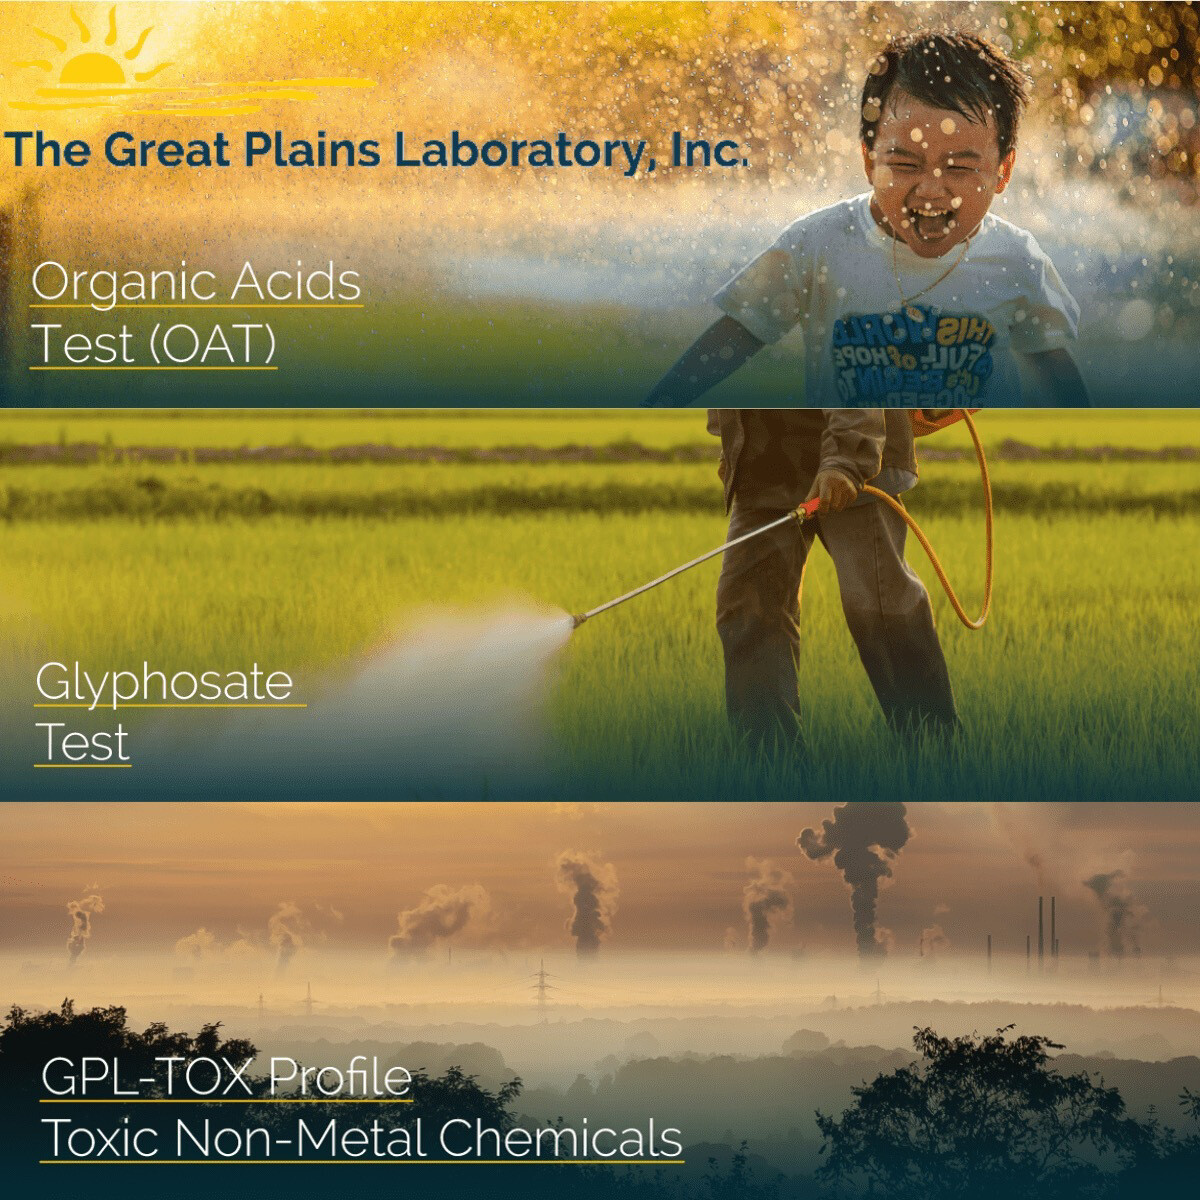 ENVIROtox Complete Panel (GPL-TOX + OAT + Glyphosate) + MycoTOX Profile (Mold Exposure) 4 tests in one USA only